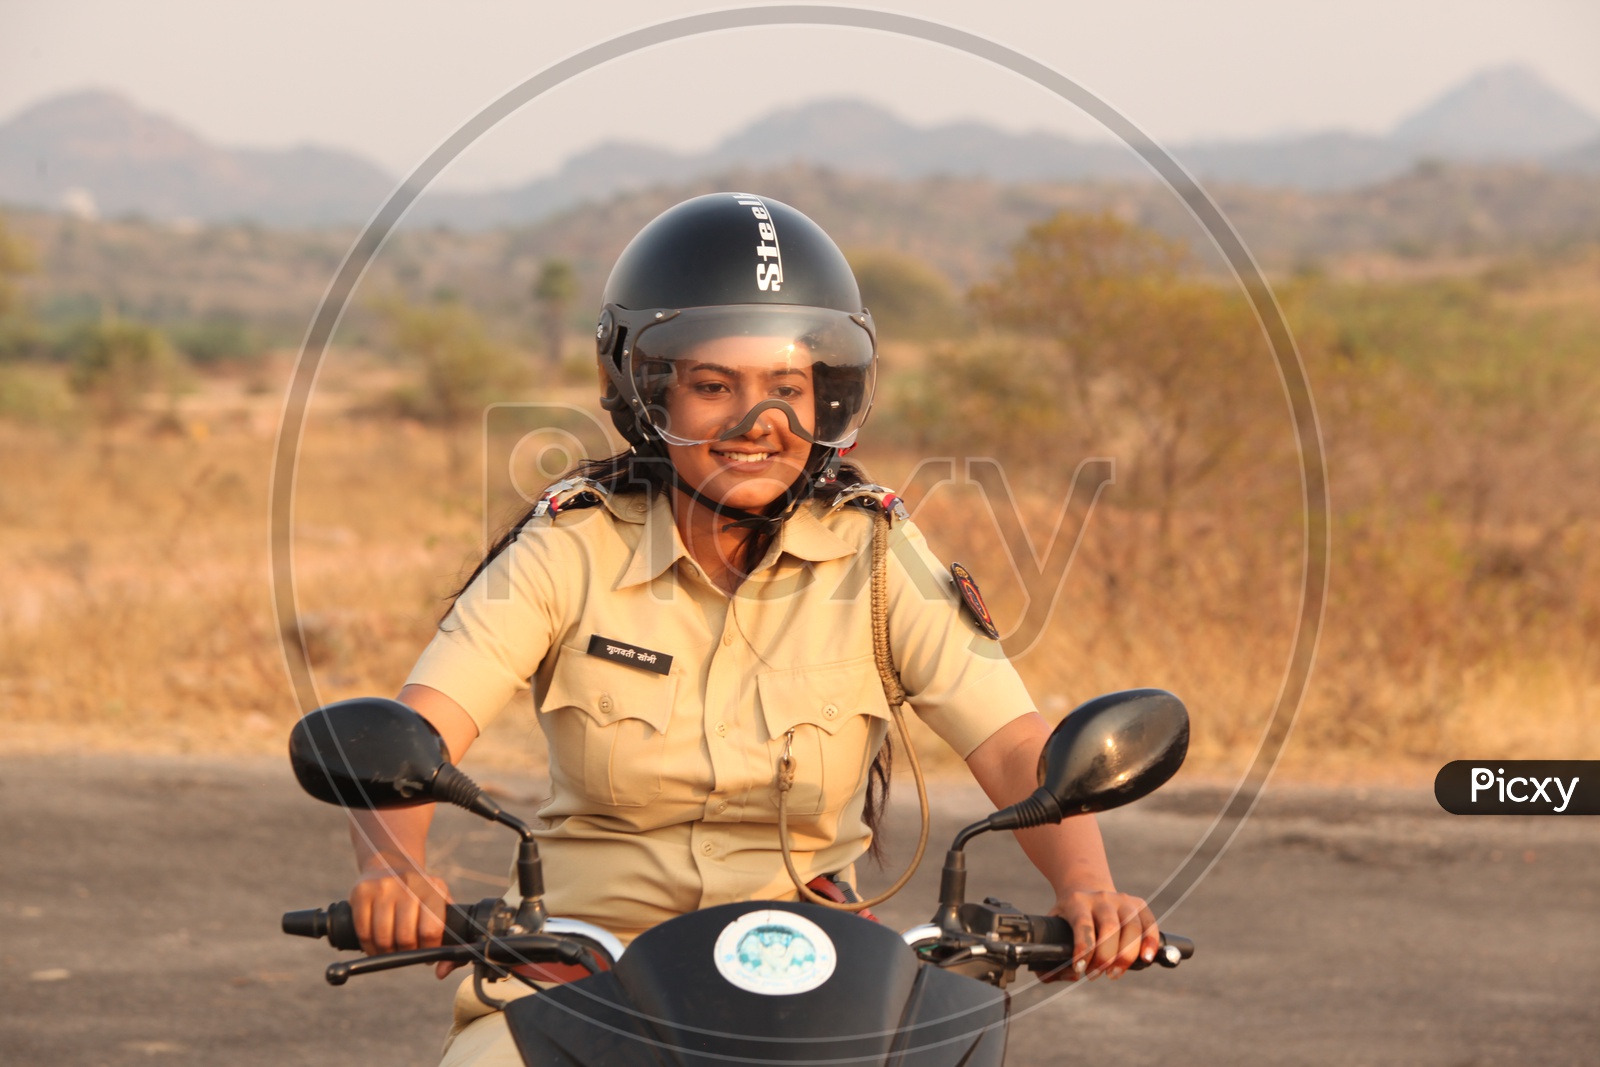 Woman Or Lady Police Driving Bike